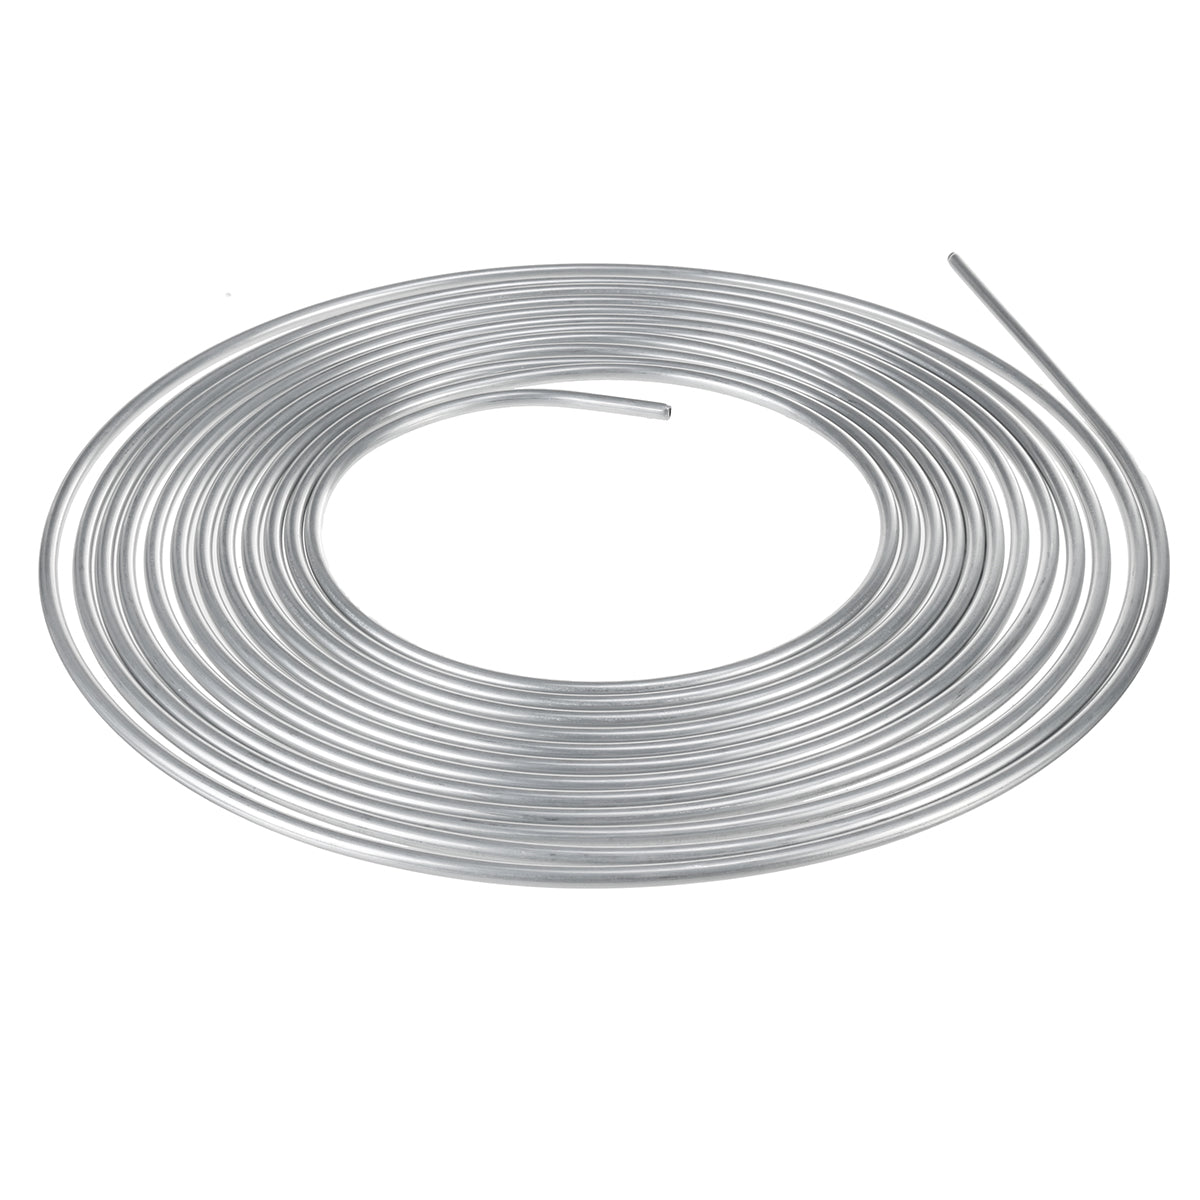 Gray 25 Foot Coil Roll Coil of 1/4" OD Steel Zinc Silver Brake Line Fuel Tubing Kit